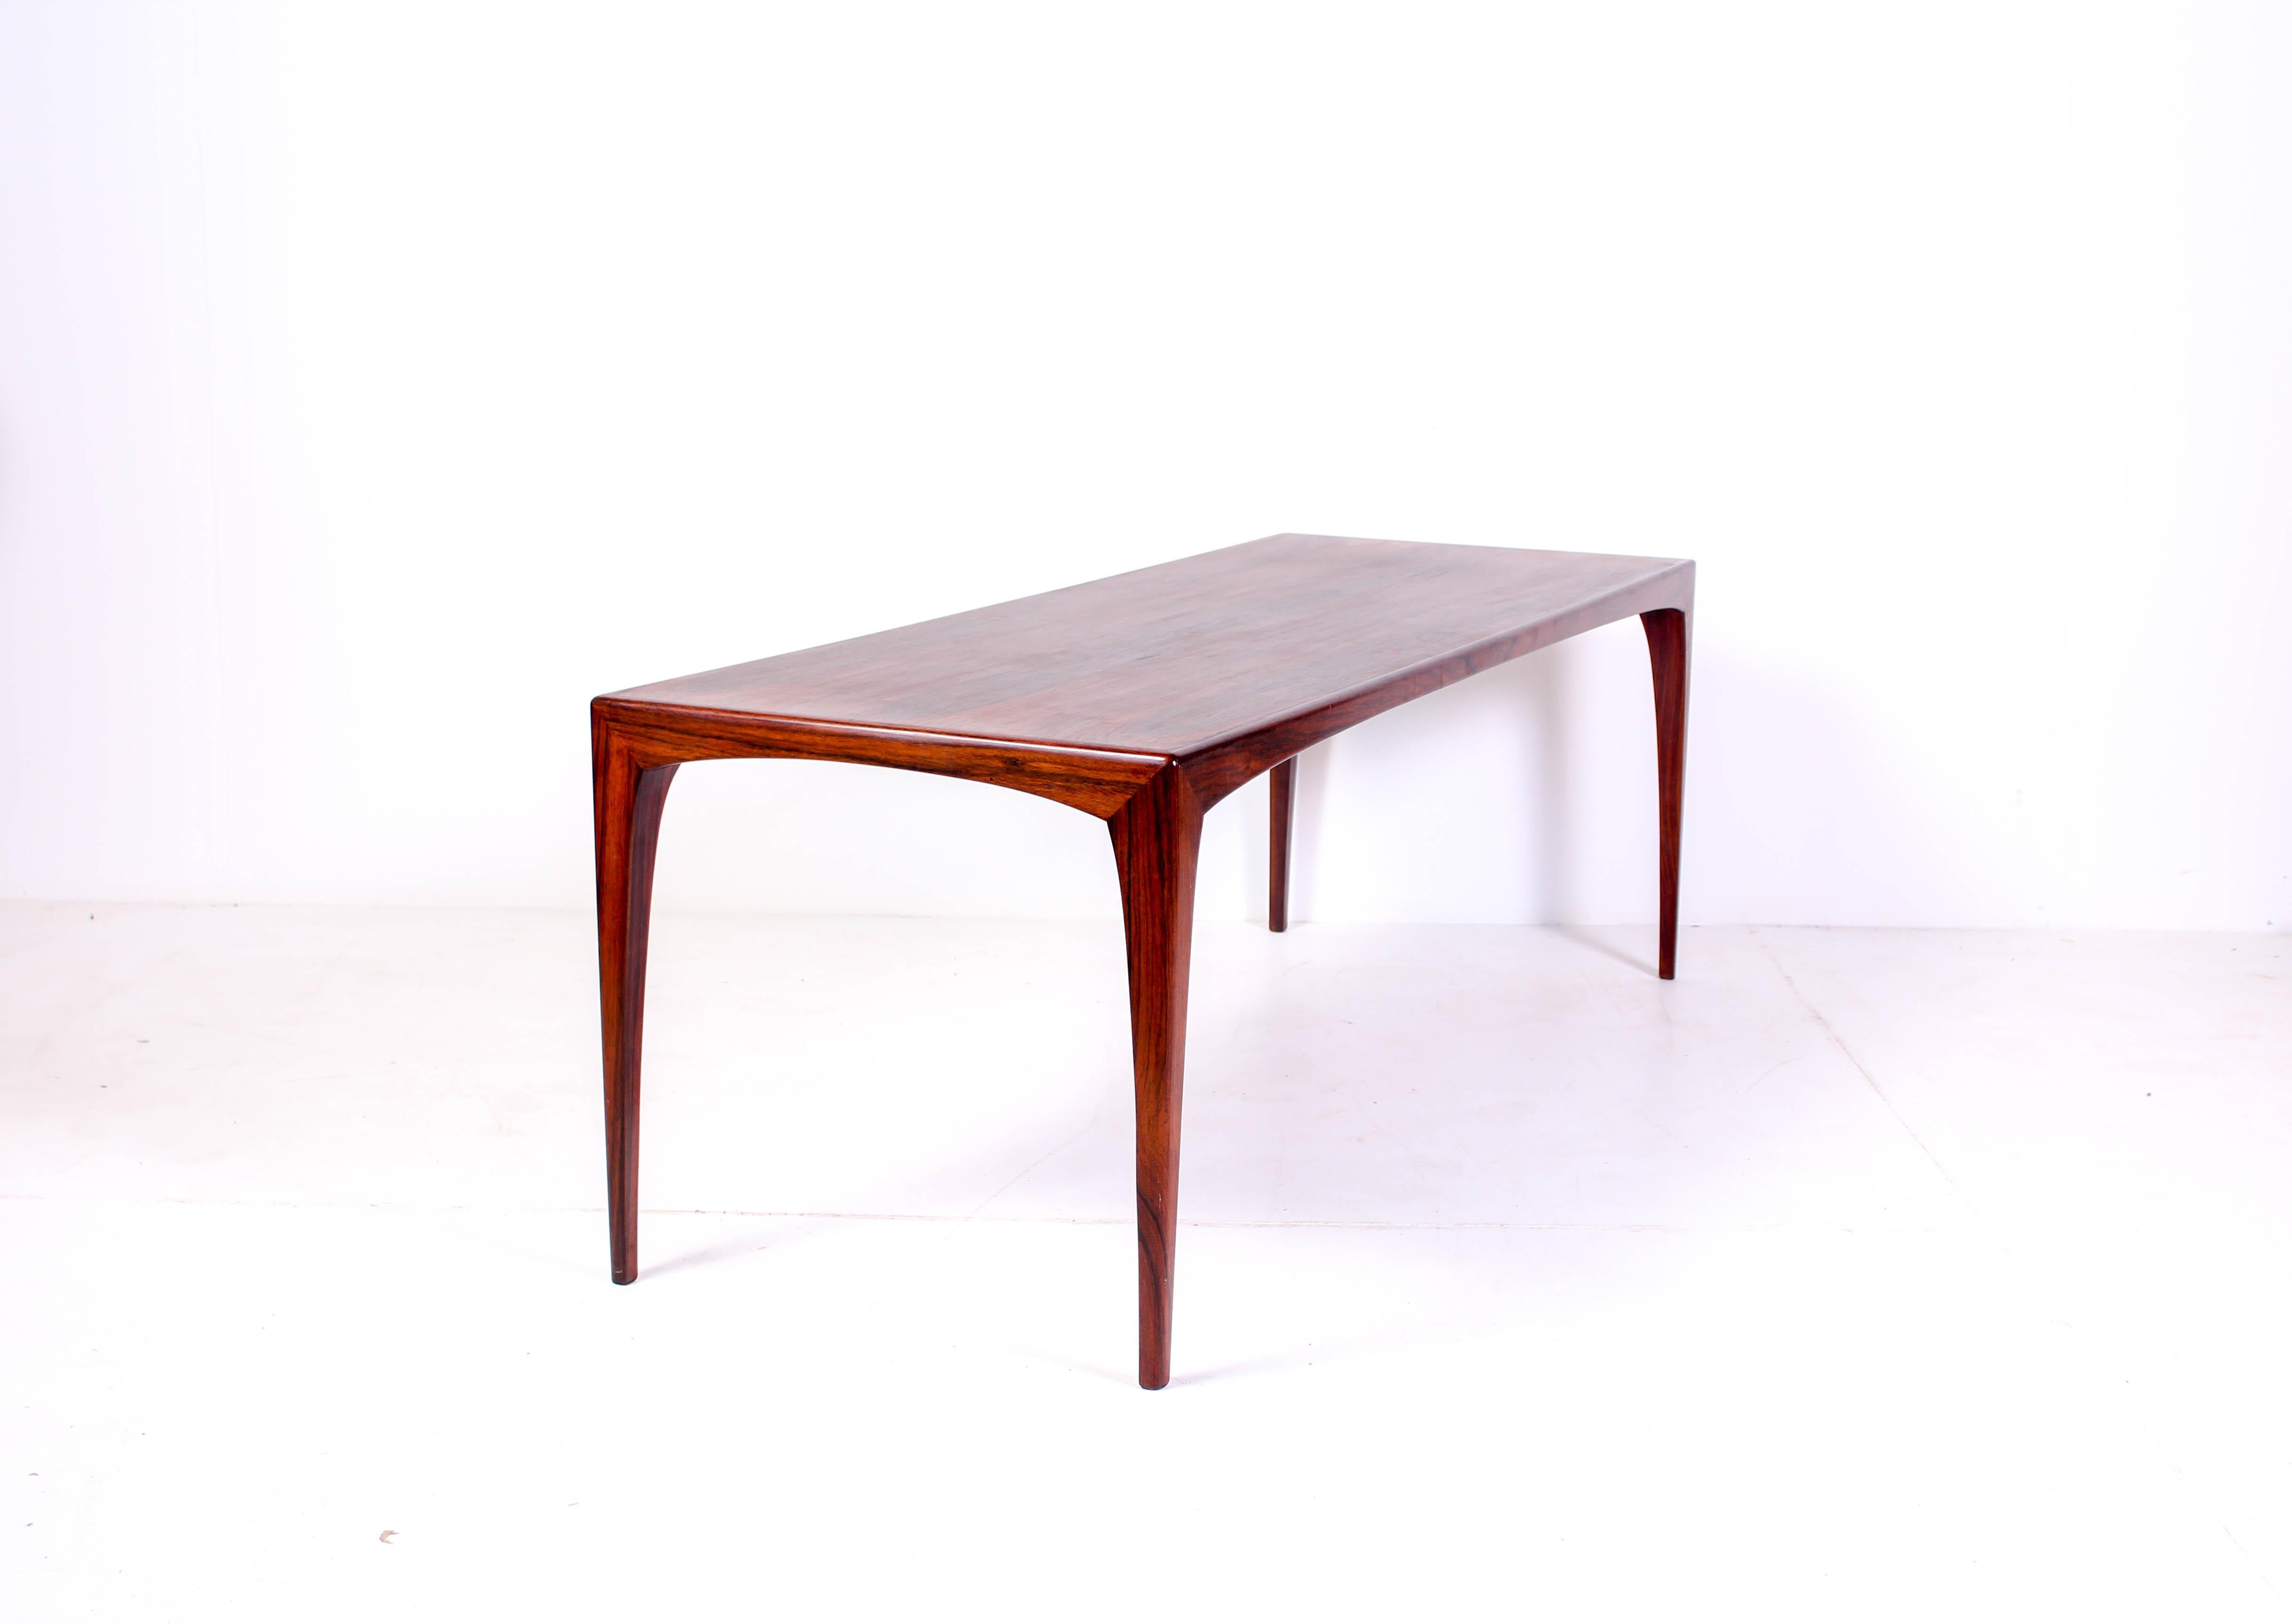 Midcentury rosewood coffee table by Danish designer Erling Torvits. The model is called HM 165 and was produced by Heltborg Møbler. This rare and beautiful coffee table has sculptured legs and dramatic grain on the tabletop.

Very good vintage